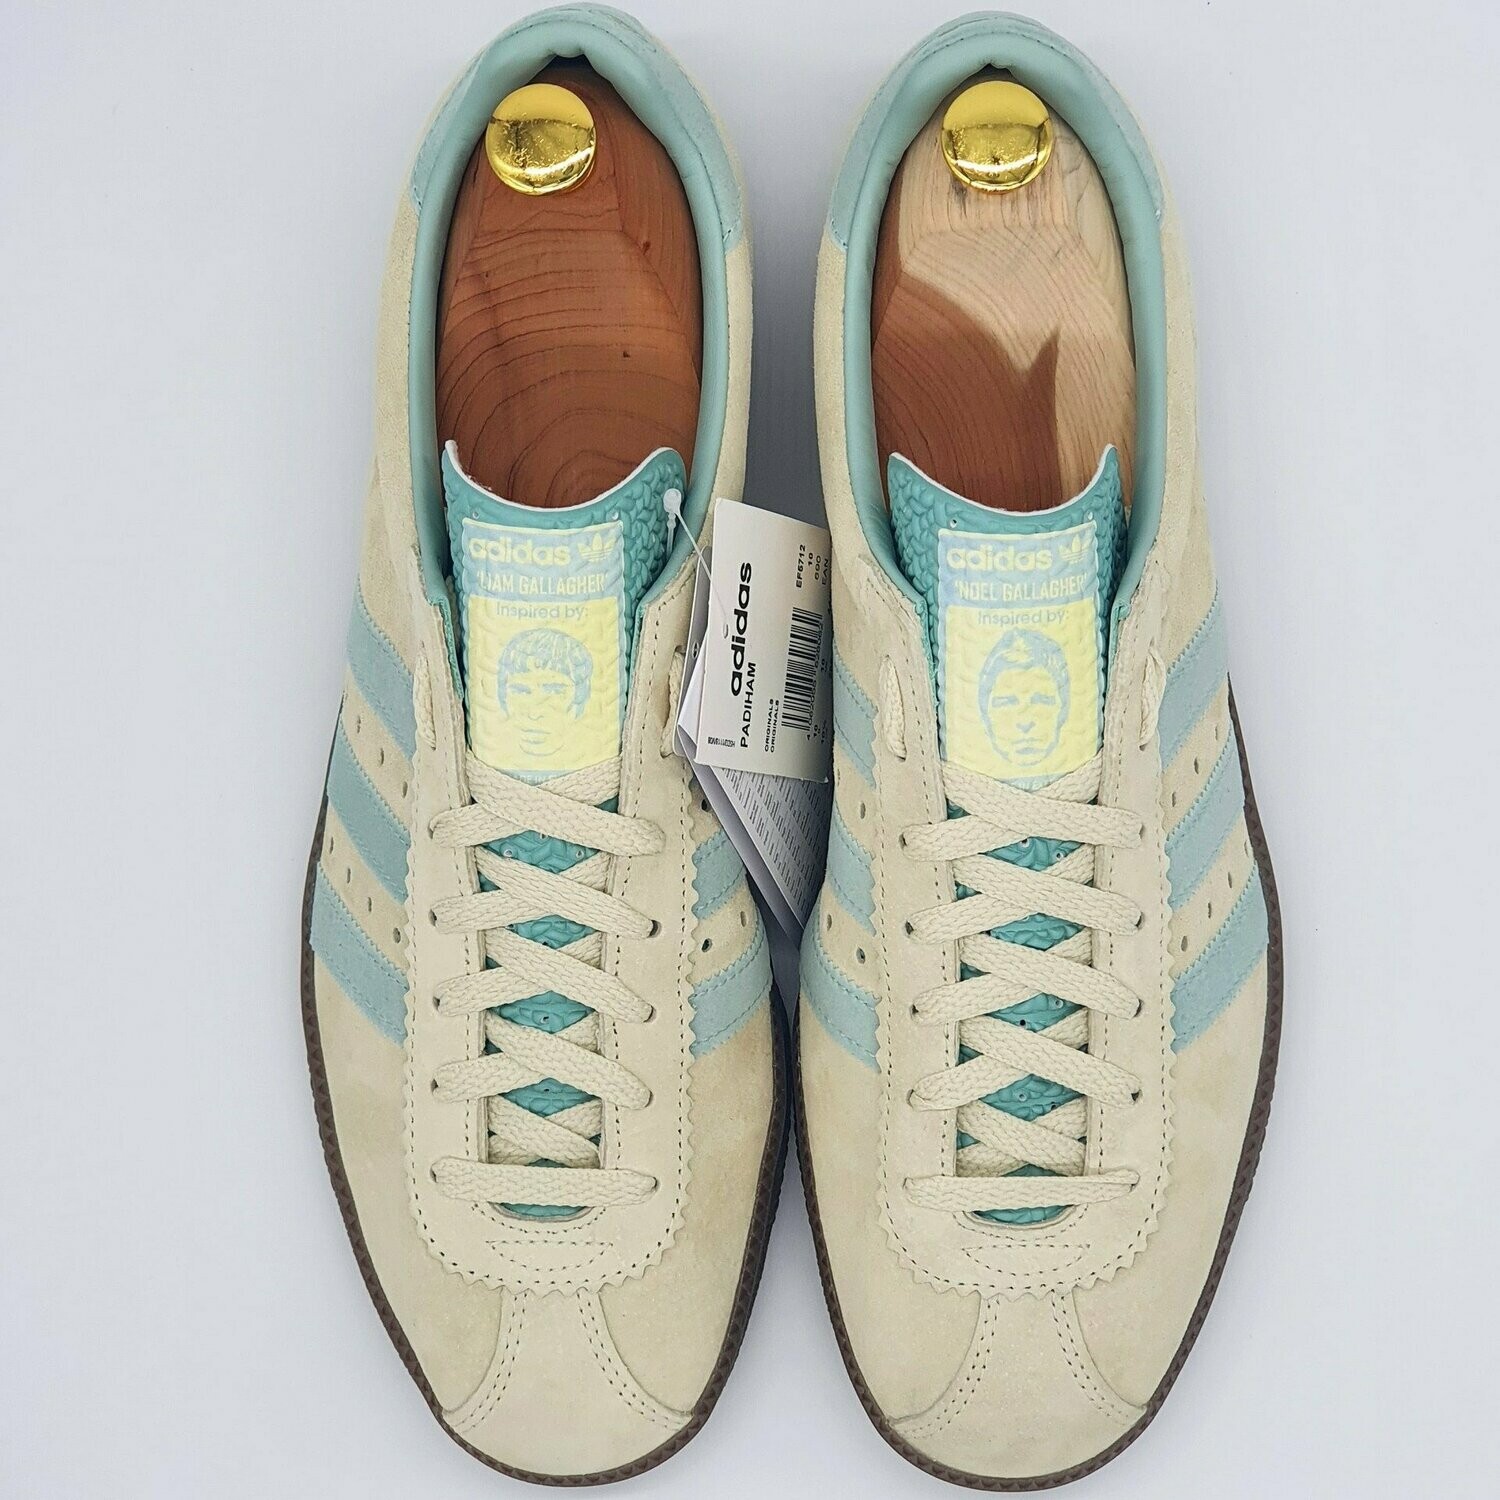 adidas oasis shoes